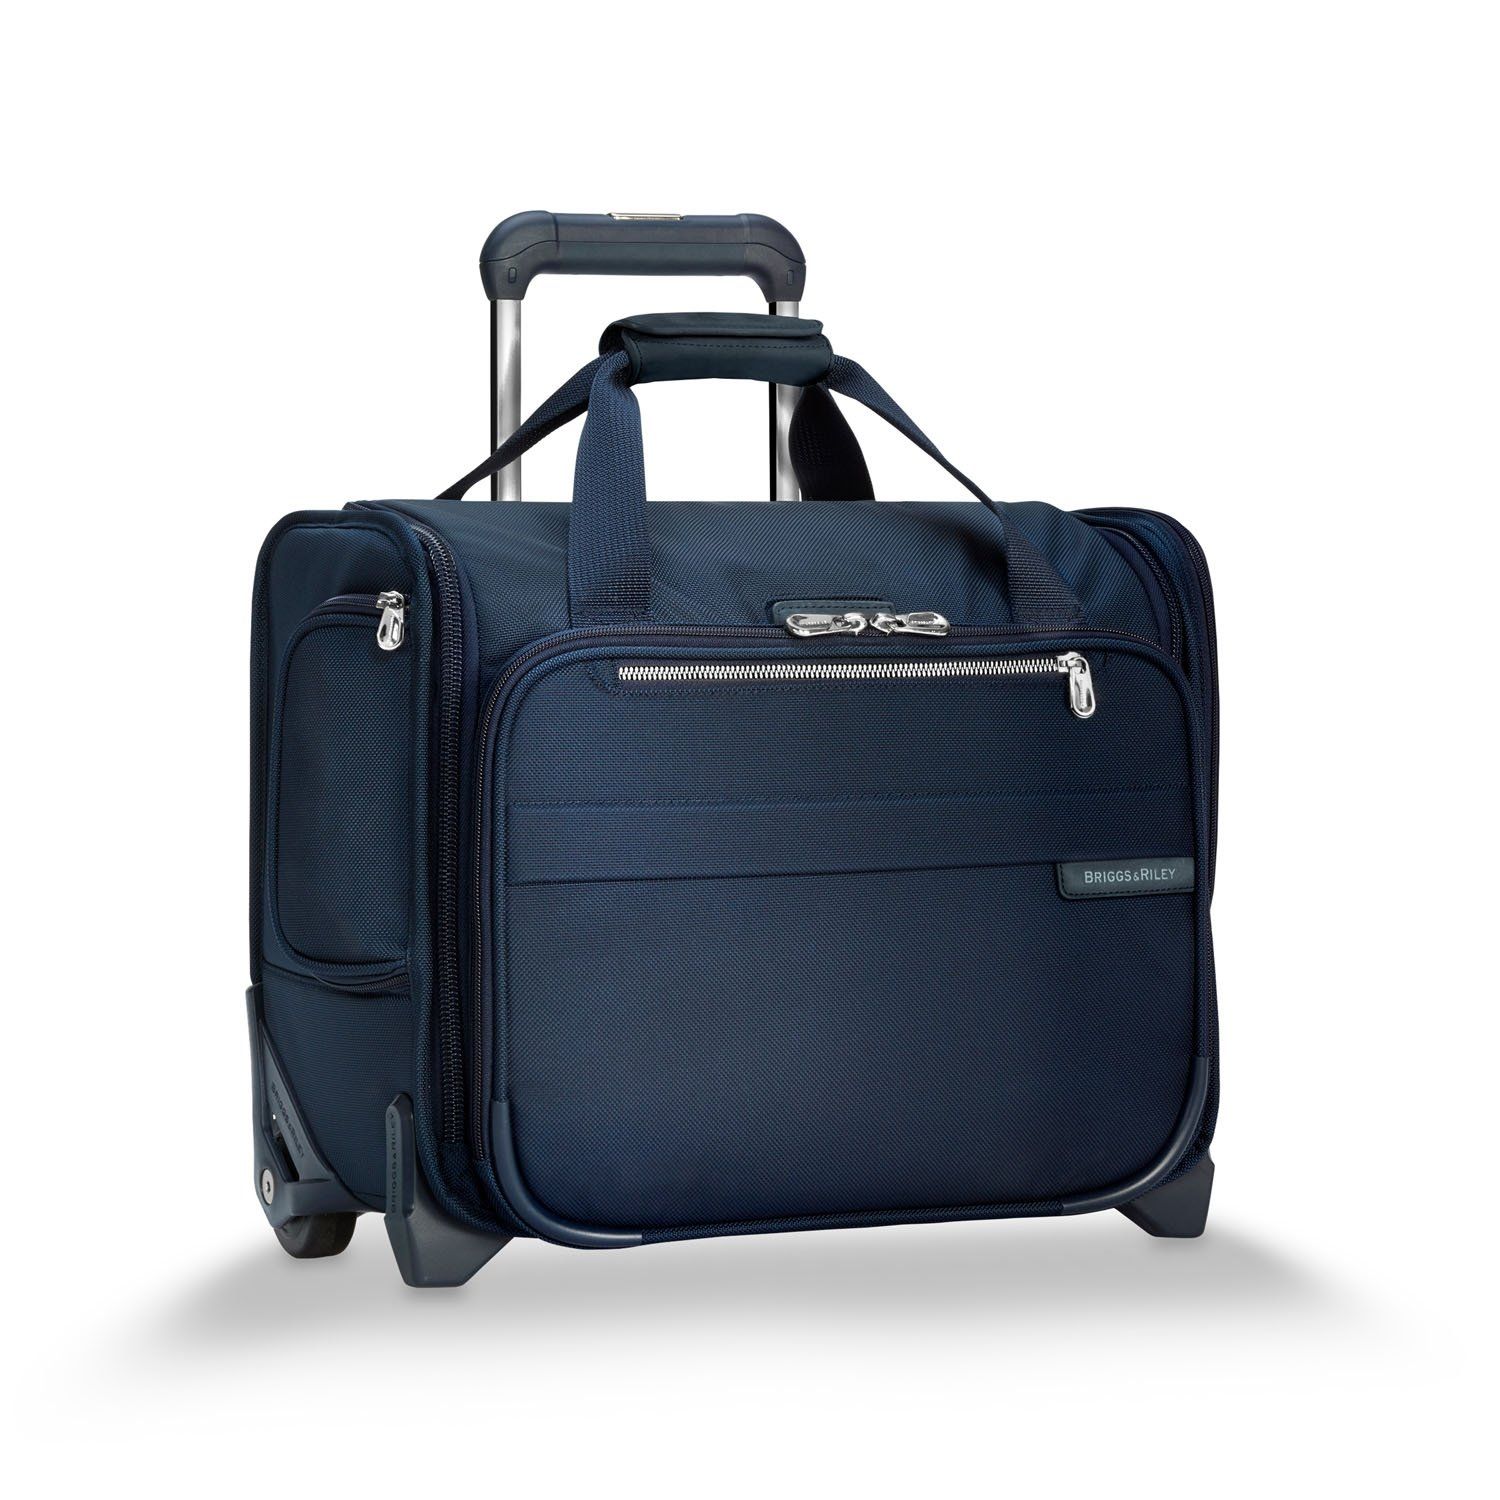 The ideal luggage to carry on board, this wheeled cabin bag keeps you organised with every turn. Fits under most airline seats as well as in the overhead compartment. Key features include: Padded pocket for iPad®. Roomy, gusseted main compartment allows bag to be easily packed and organised. Three elastic mesh pockets provide additional organisation for smaller items like belts and other accessories. Interlocking handle system allows bag to stack and stay secure on top of other Briggs & Riley Baseline Uprights®. Outsider® handle provides greater interior capacity and a flat interior surface for packing so clothing arrives wrinkle-free. Side water bottle zipper pocket for easy access to beverage.